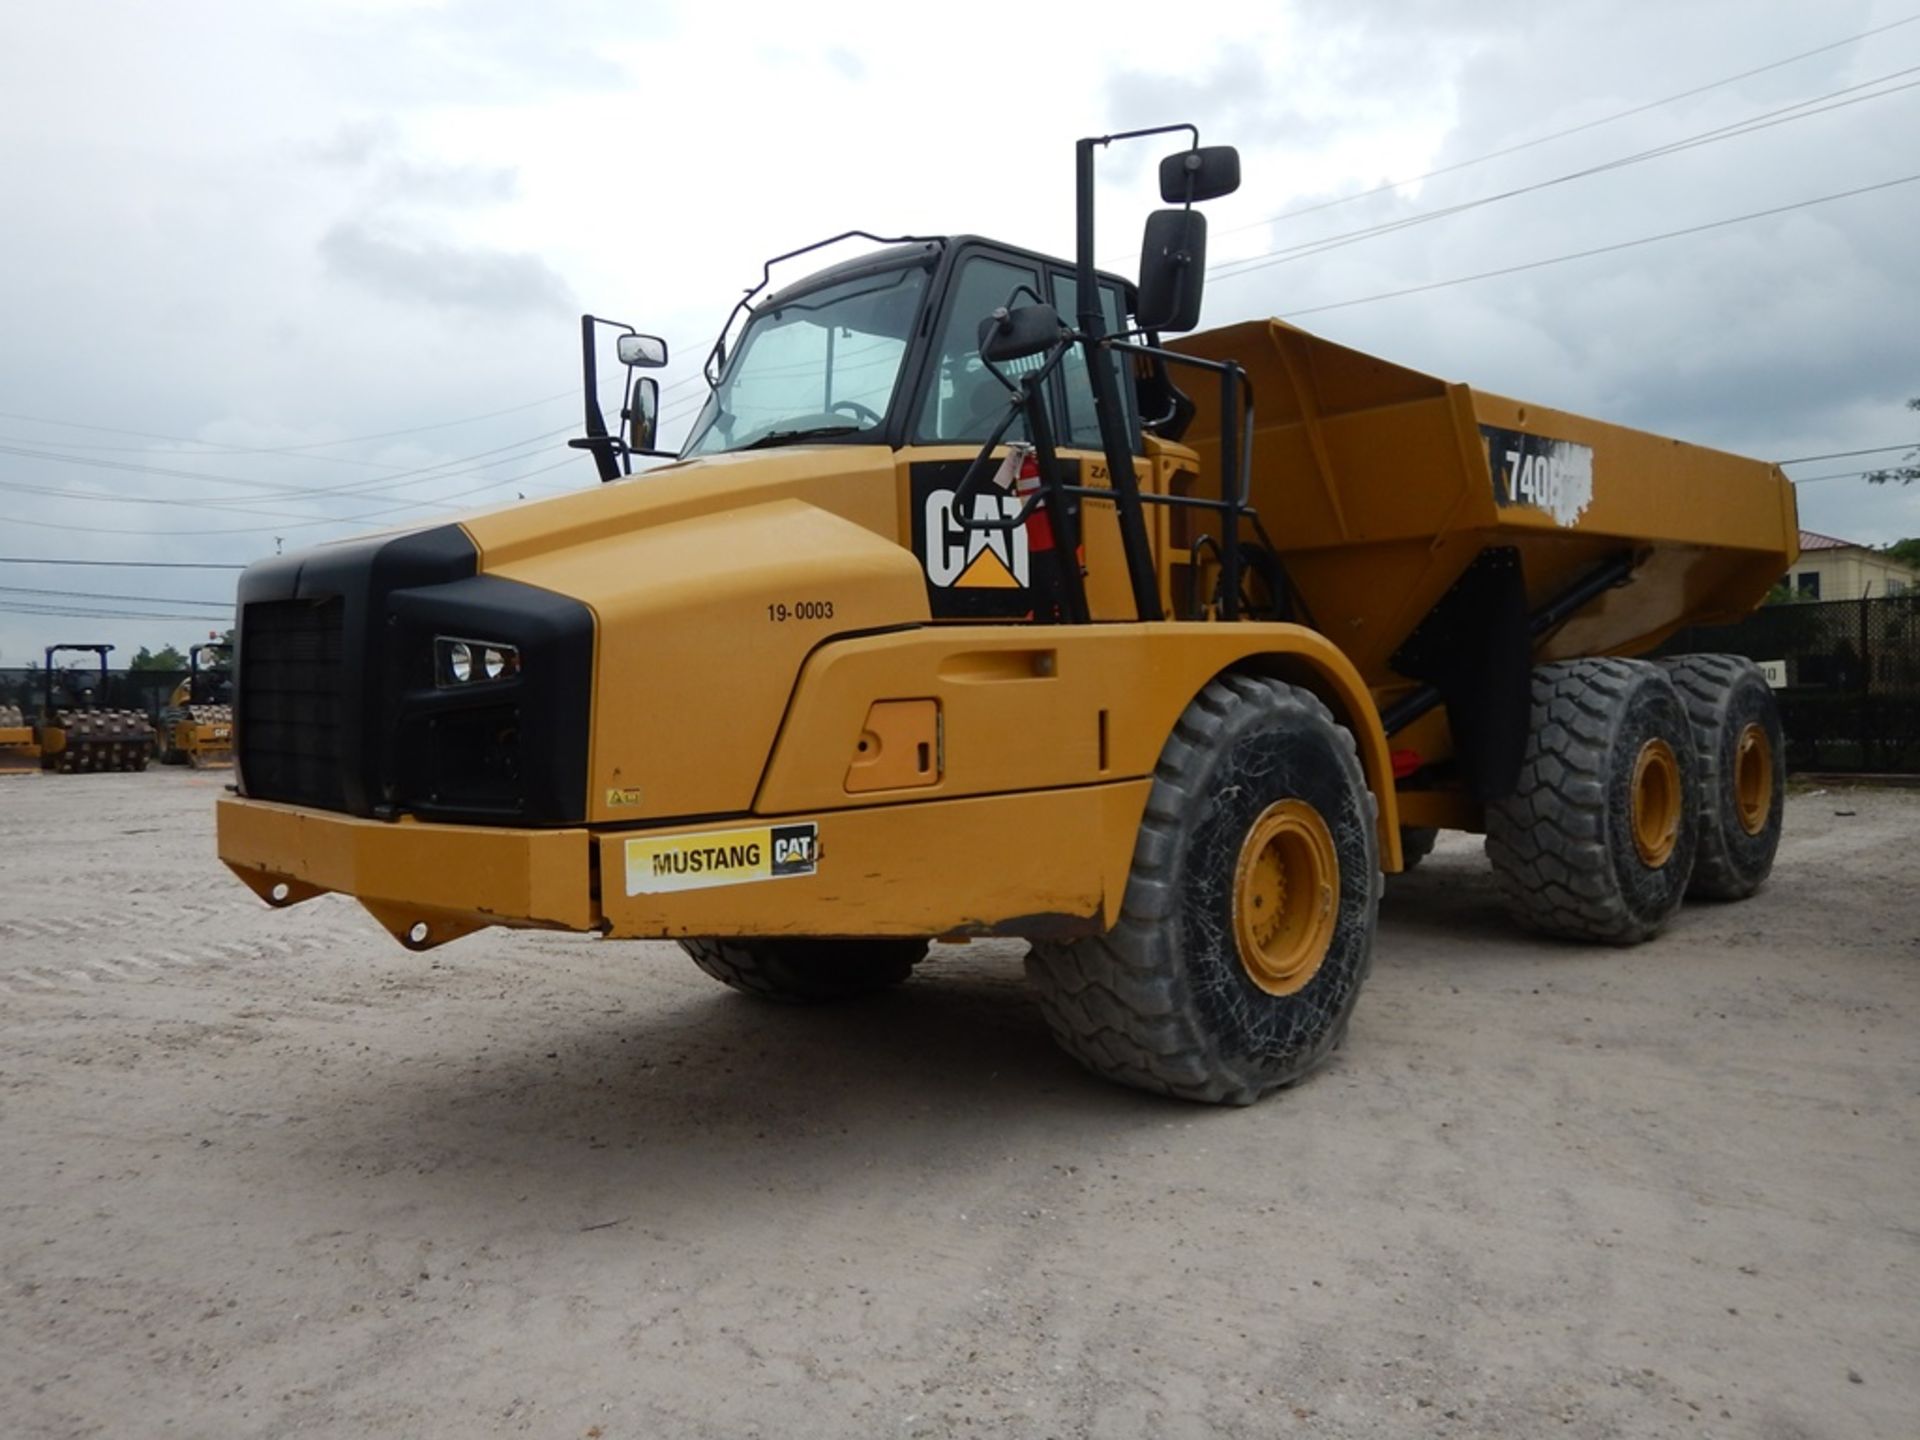 2012 Caterpillar Model 740B Off Highway Truck 4,376 Hours | CAB, A/C, CAT C15 DIESEL ENGINE, WITH